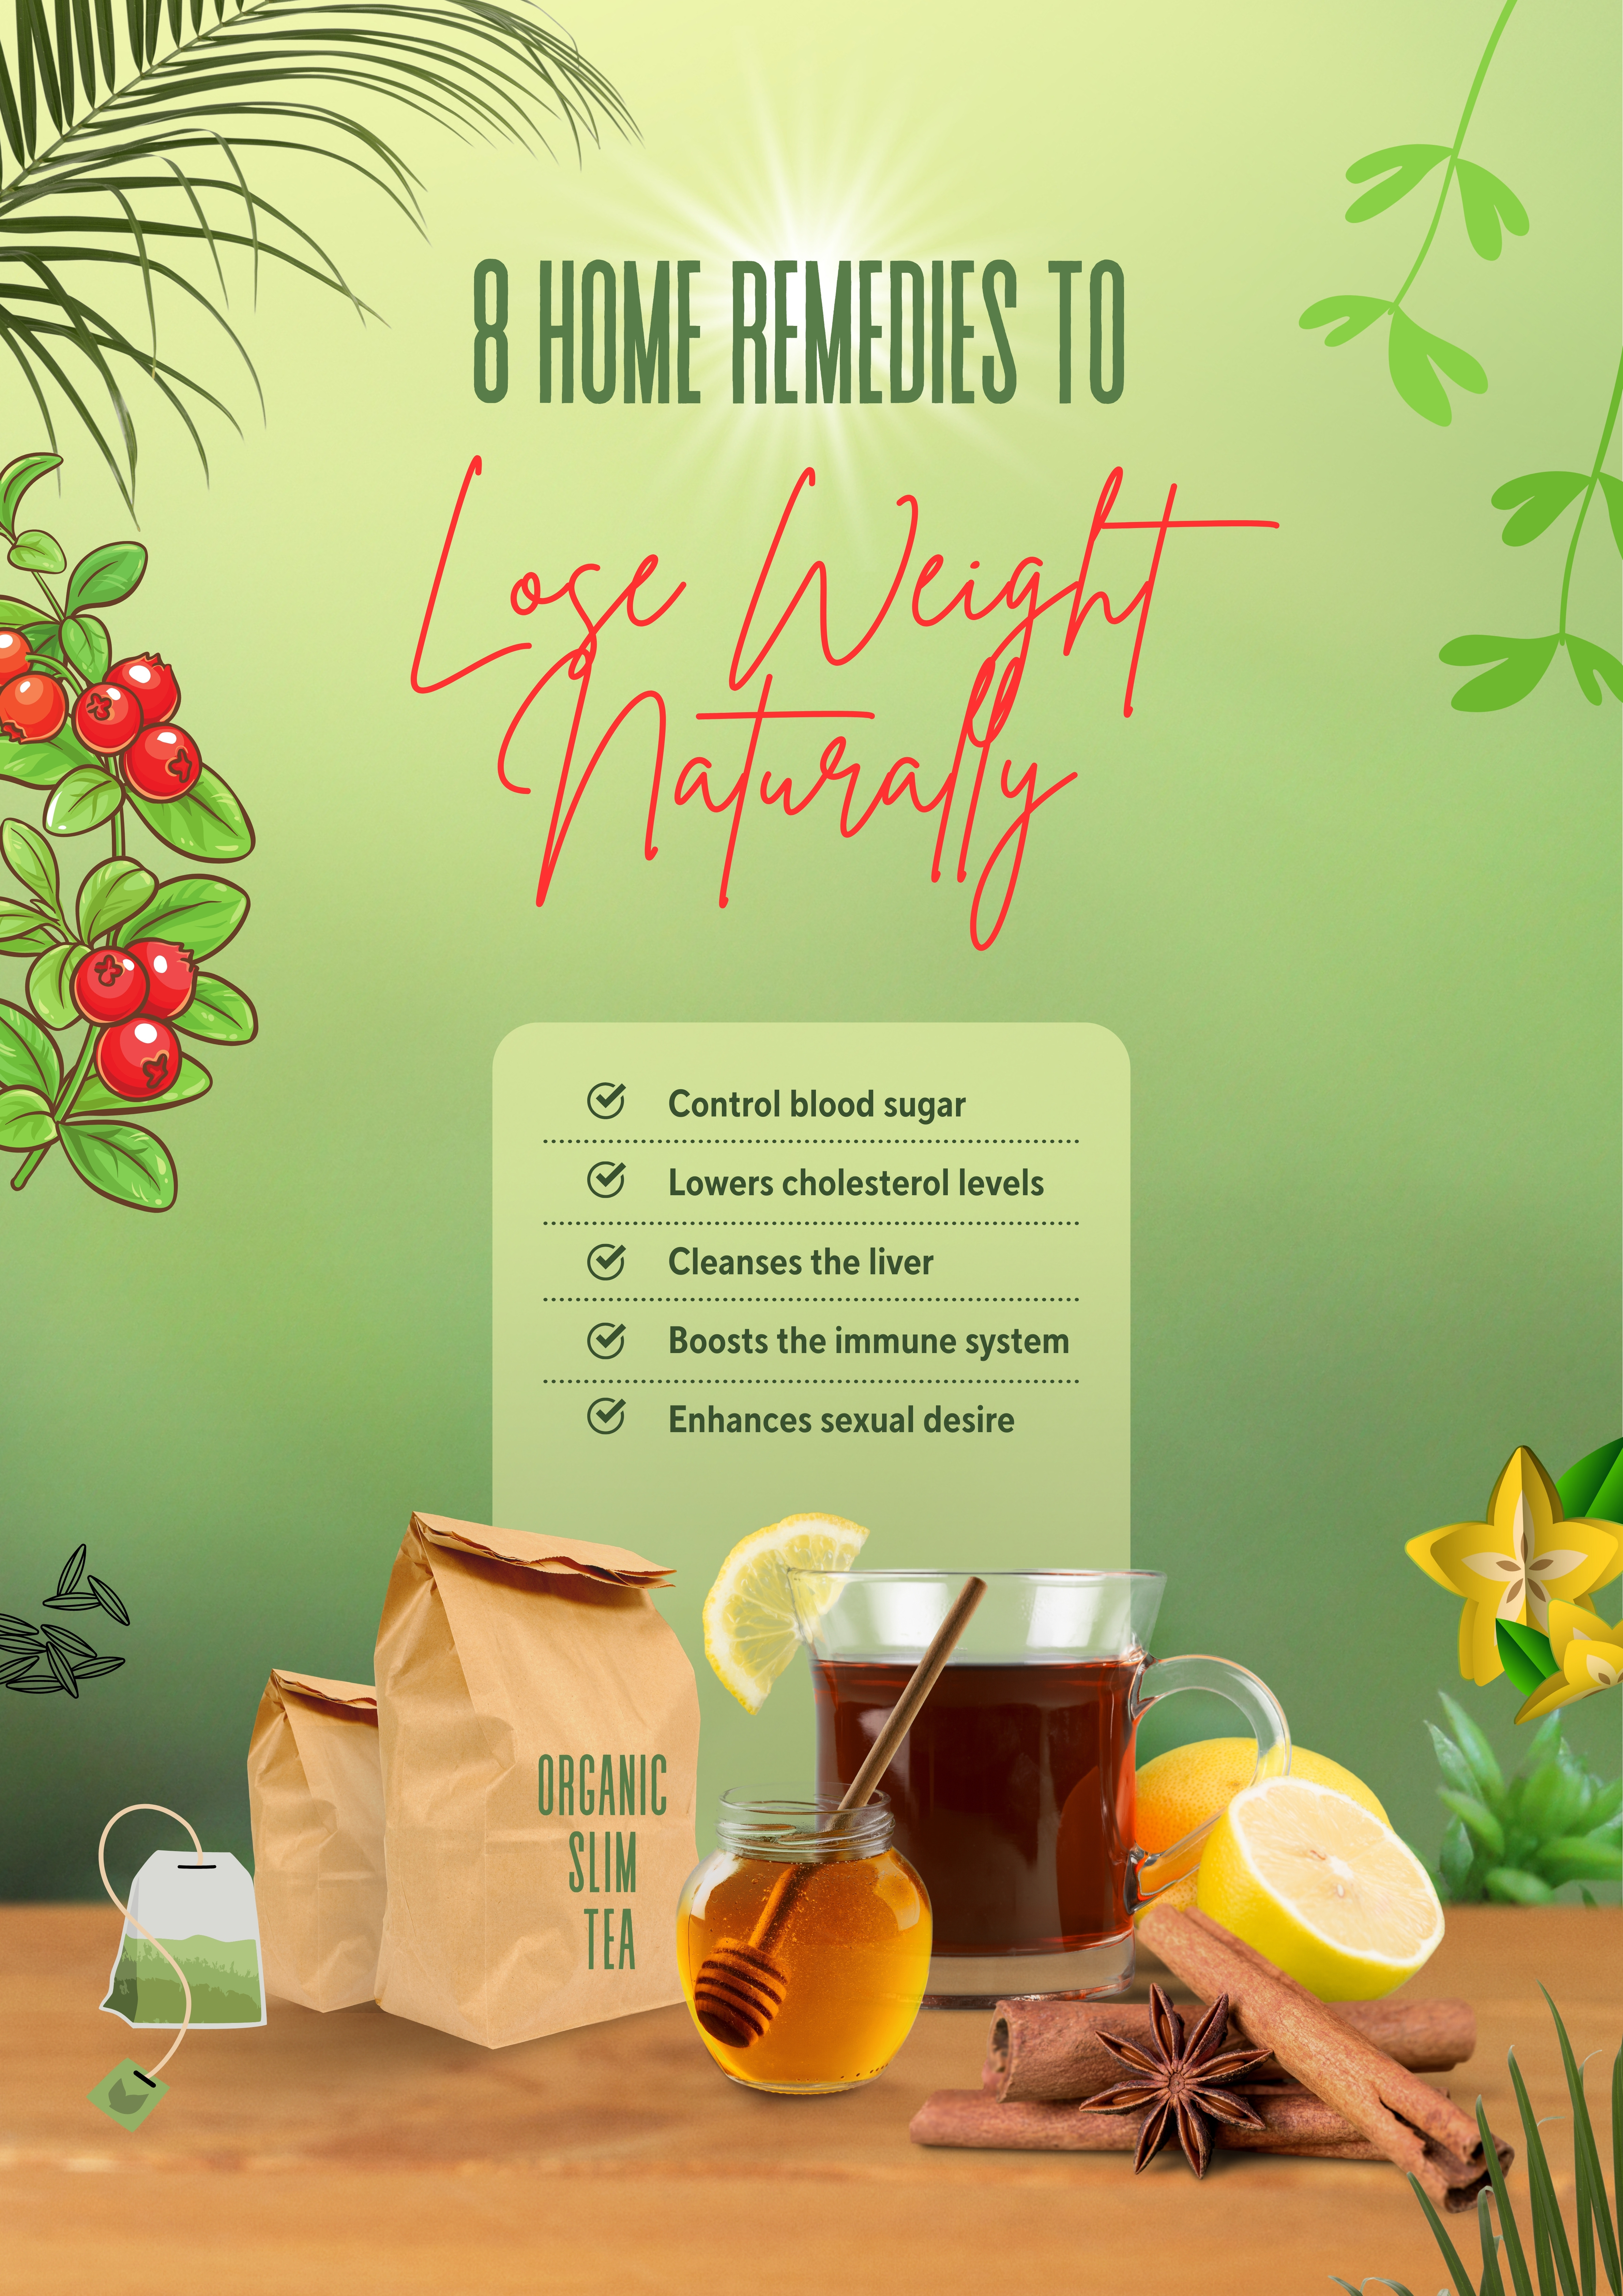 Home Remedies To Reduce weight